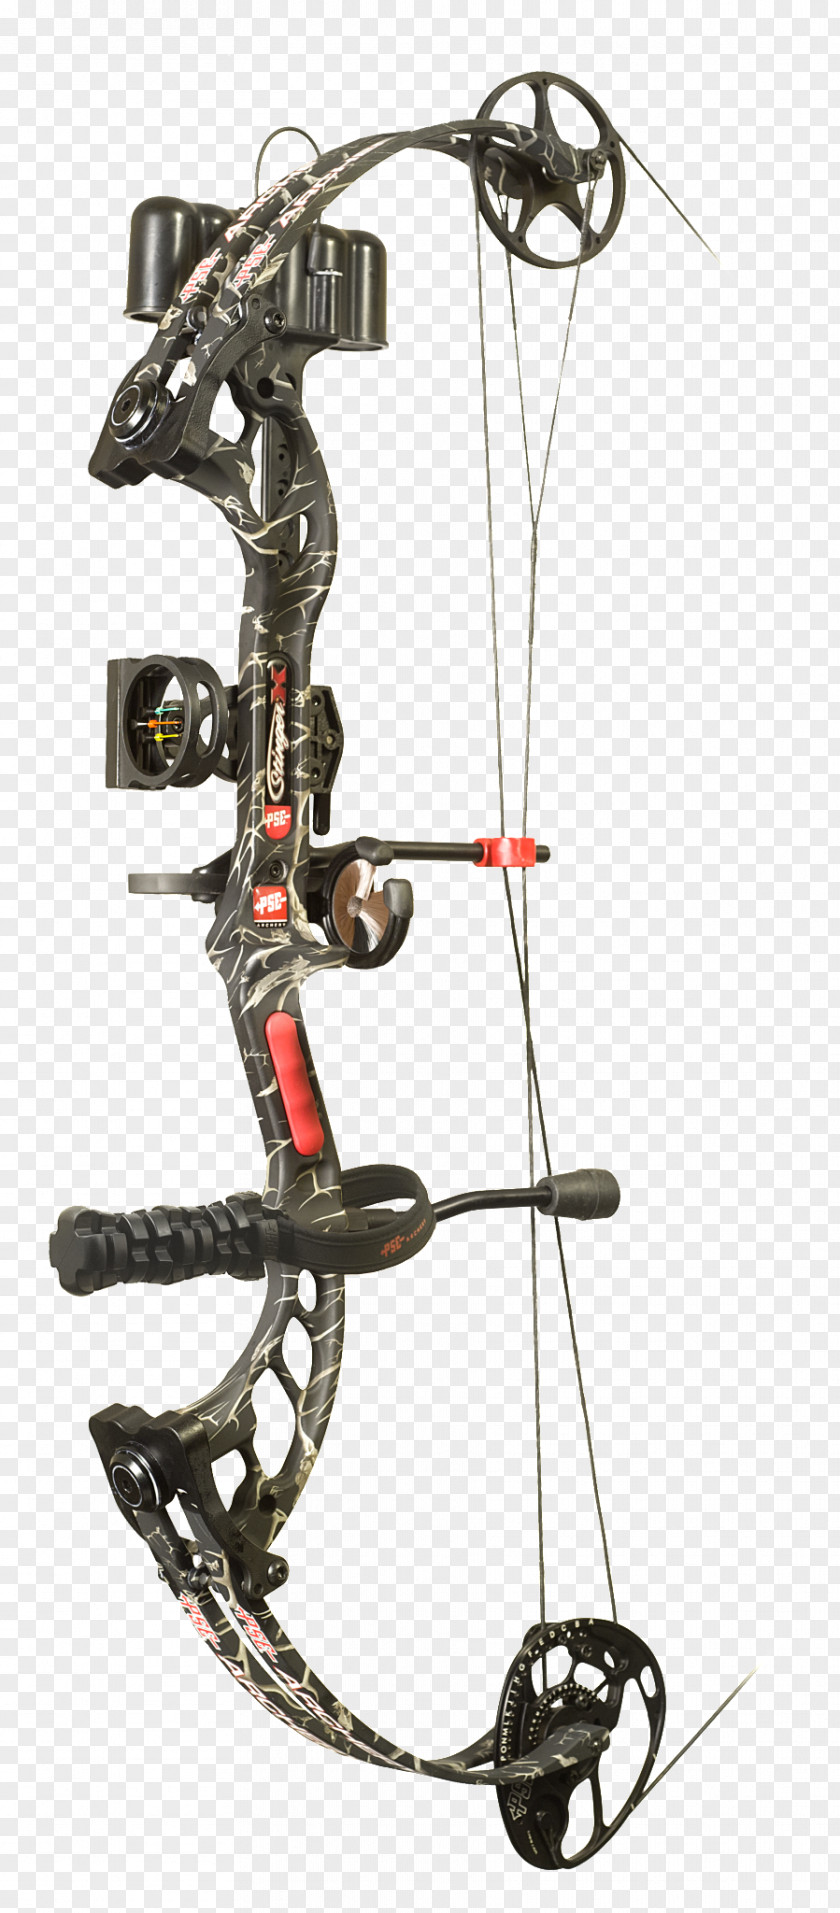 Compound Bows PSE Archery Hunting Bow And Arrow PNG